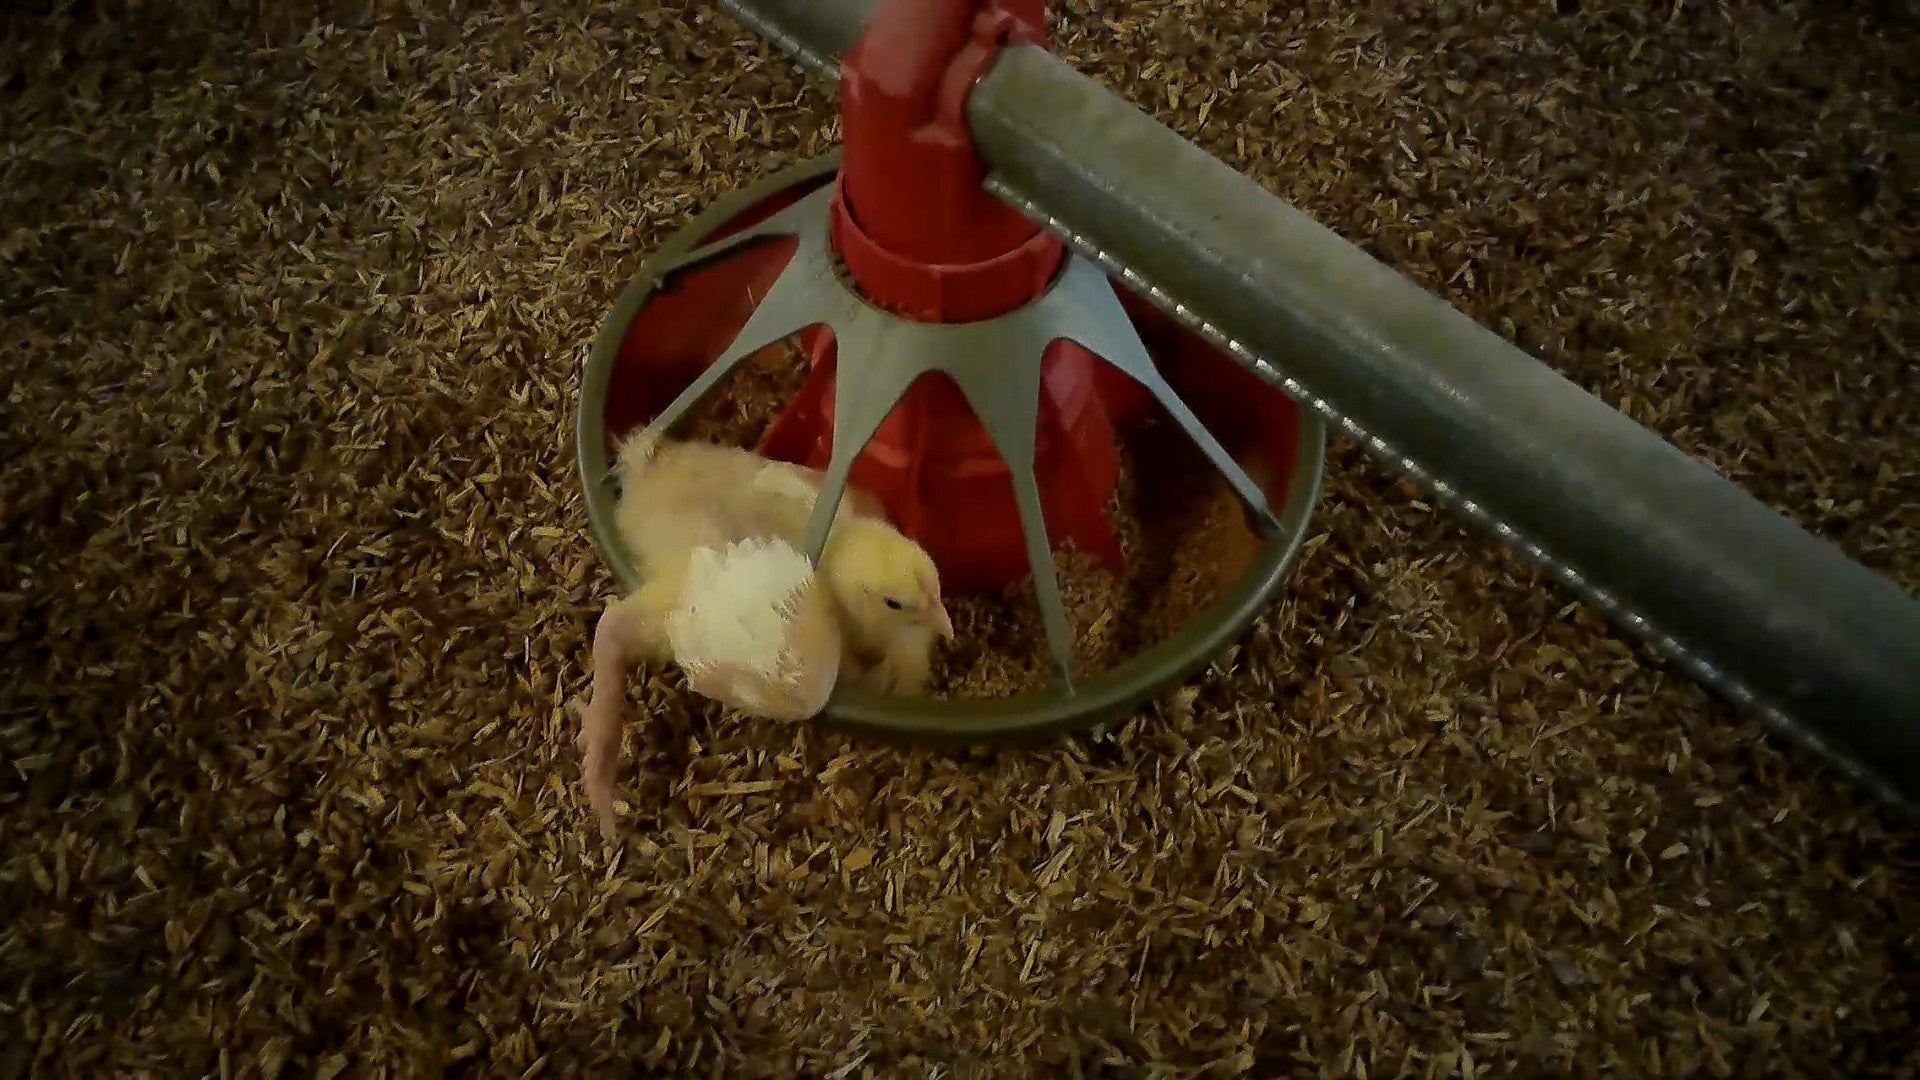 A young bird is trapped in a feeder